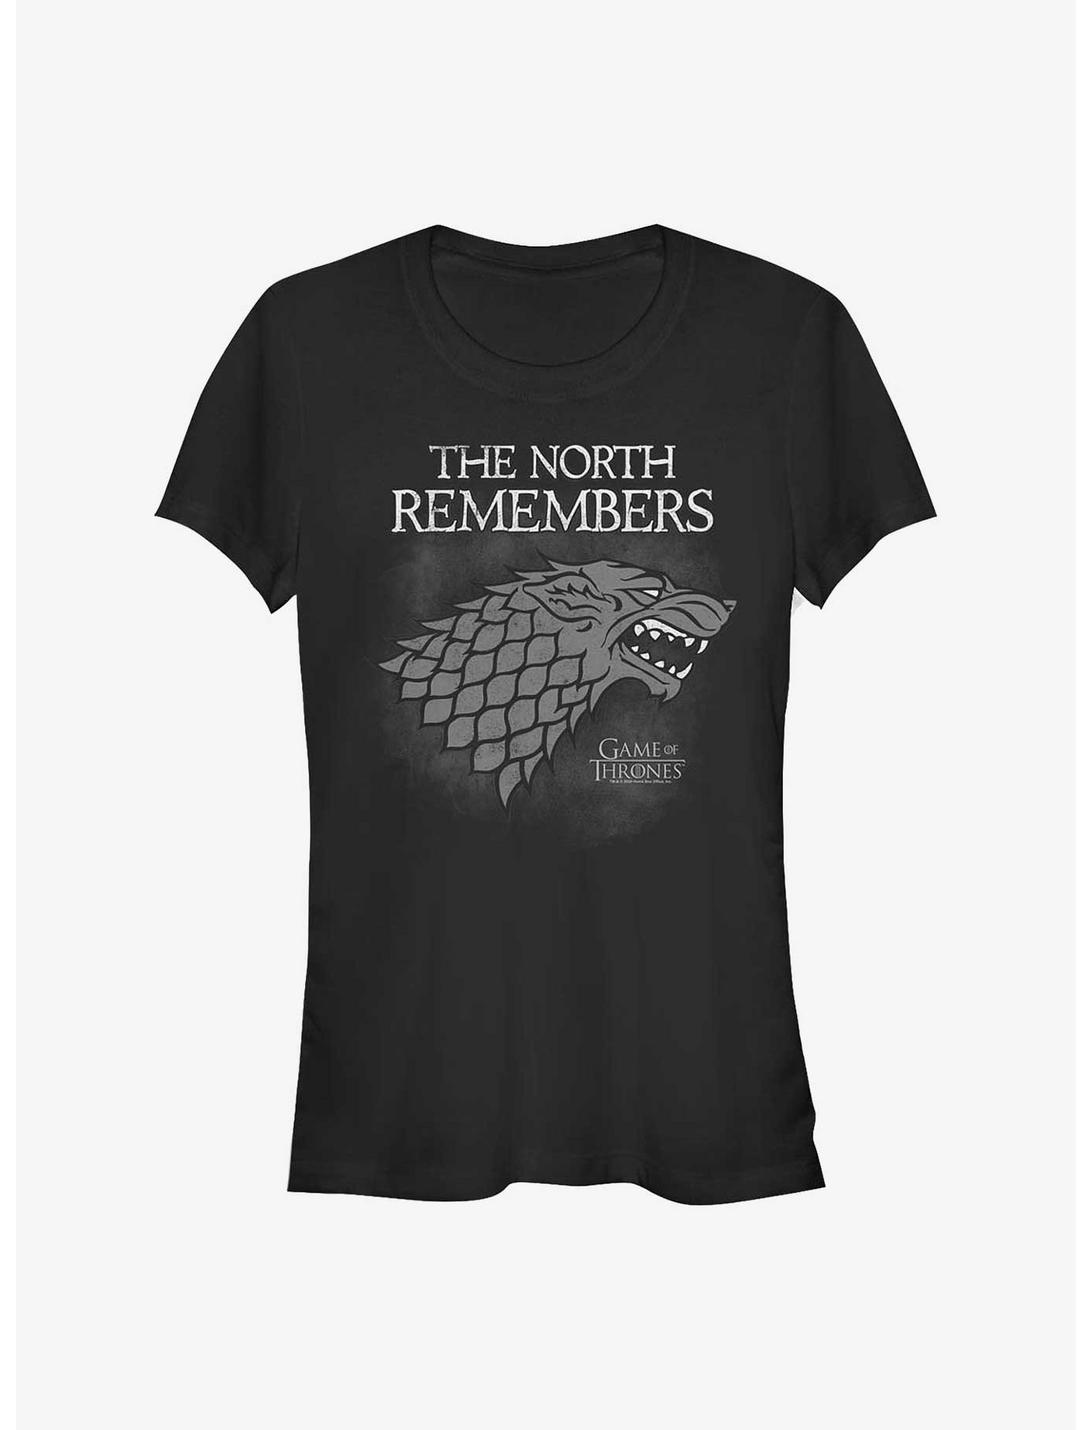 Game Of Thrones House Stark North Remembers Girls T-Shirt, BLACK, hi-res